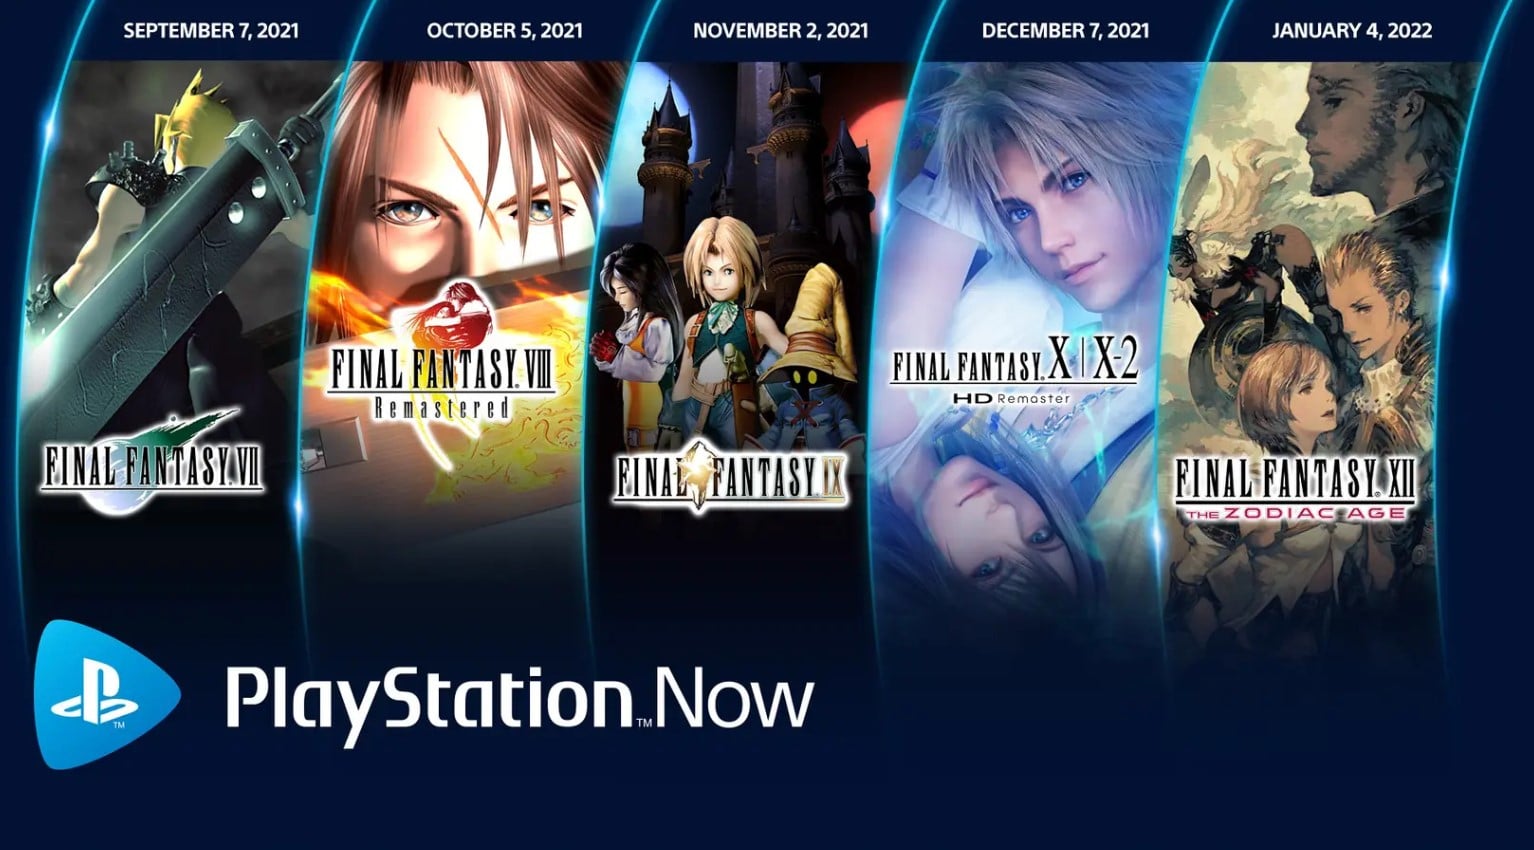 Final Fantasy games coming to PlayStation Now starting this month